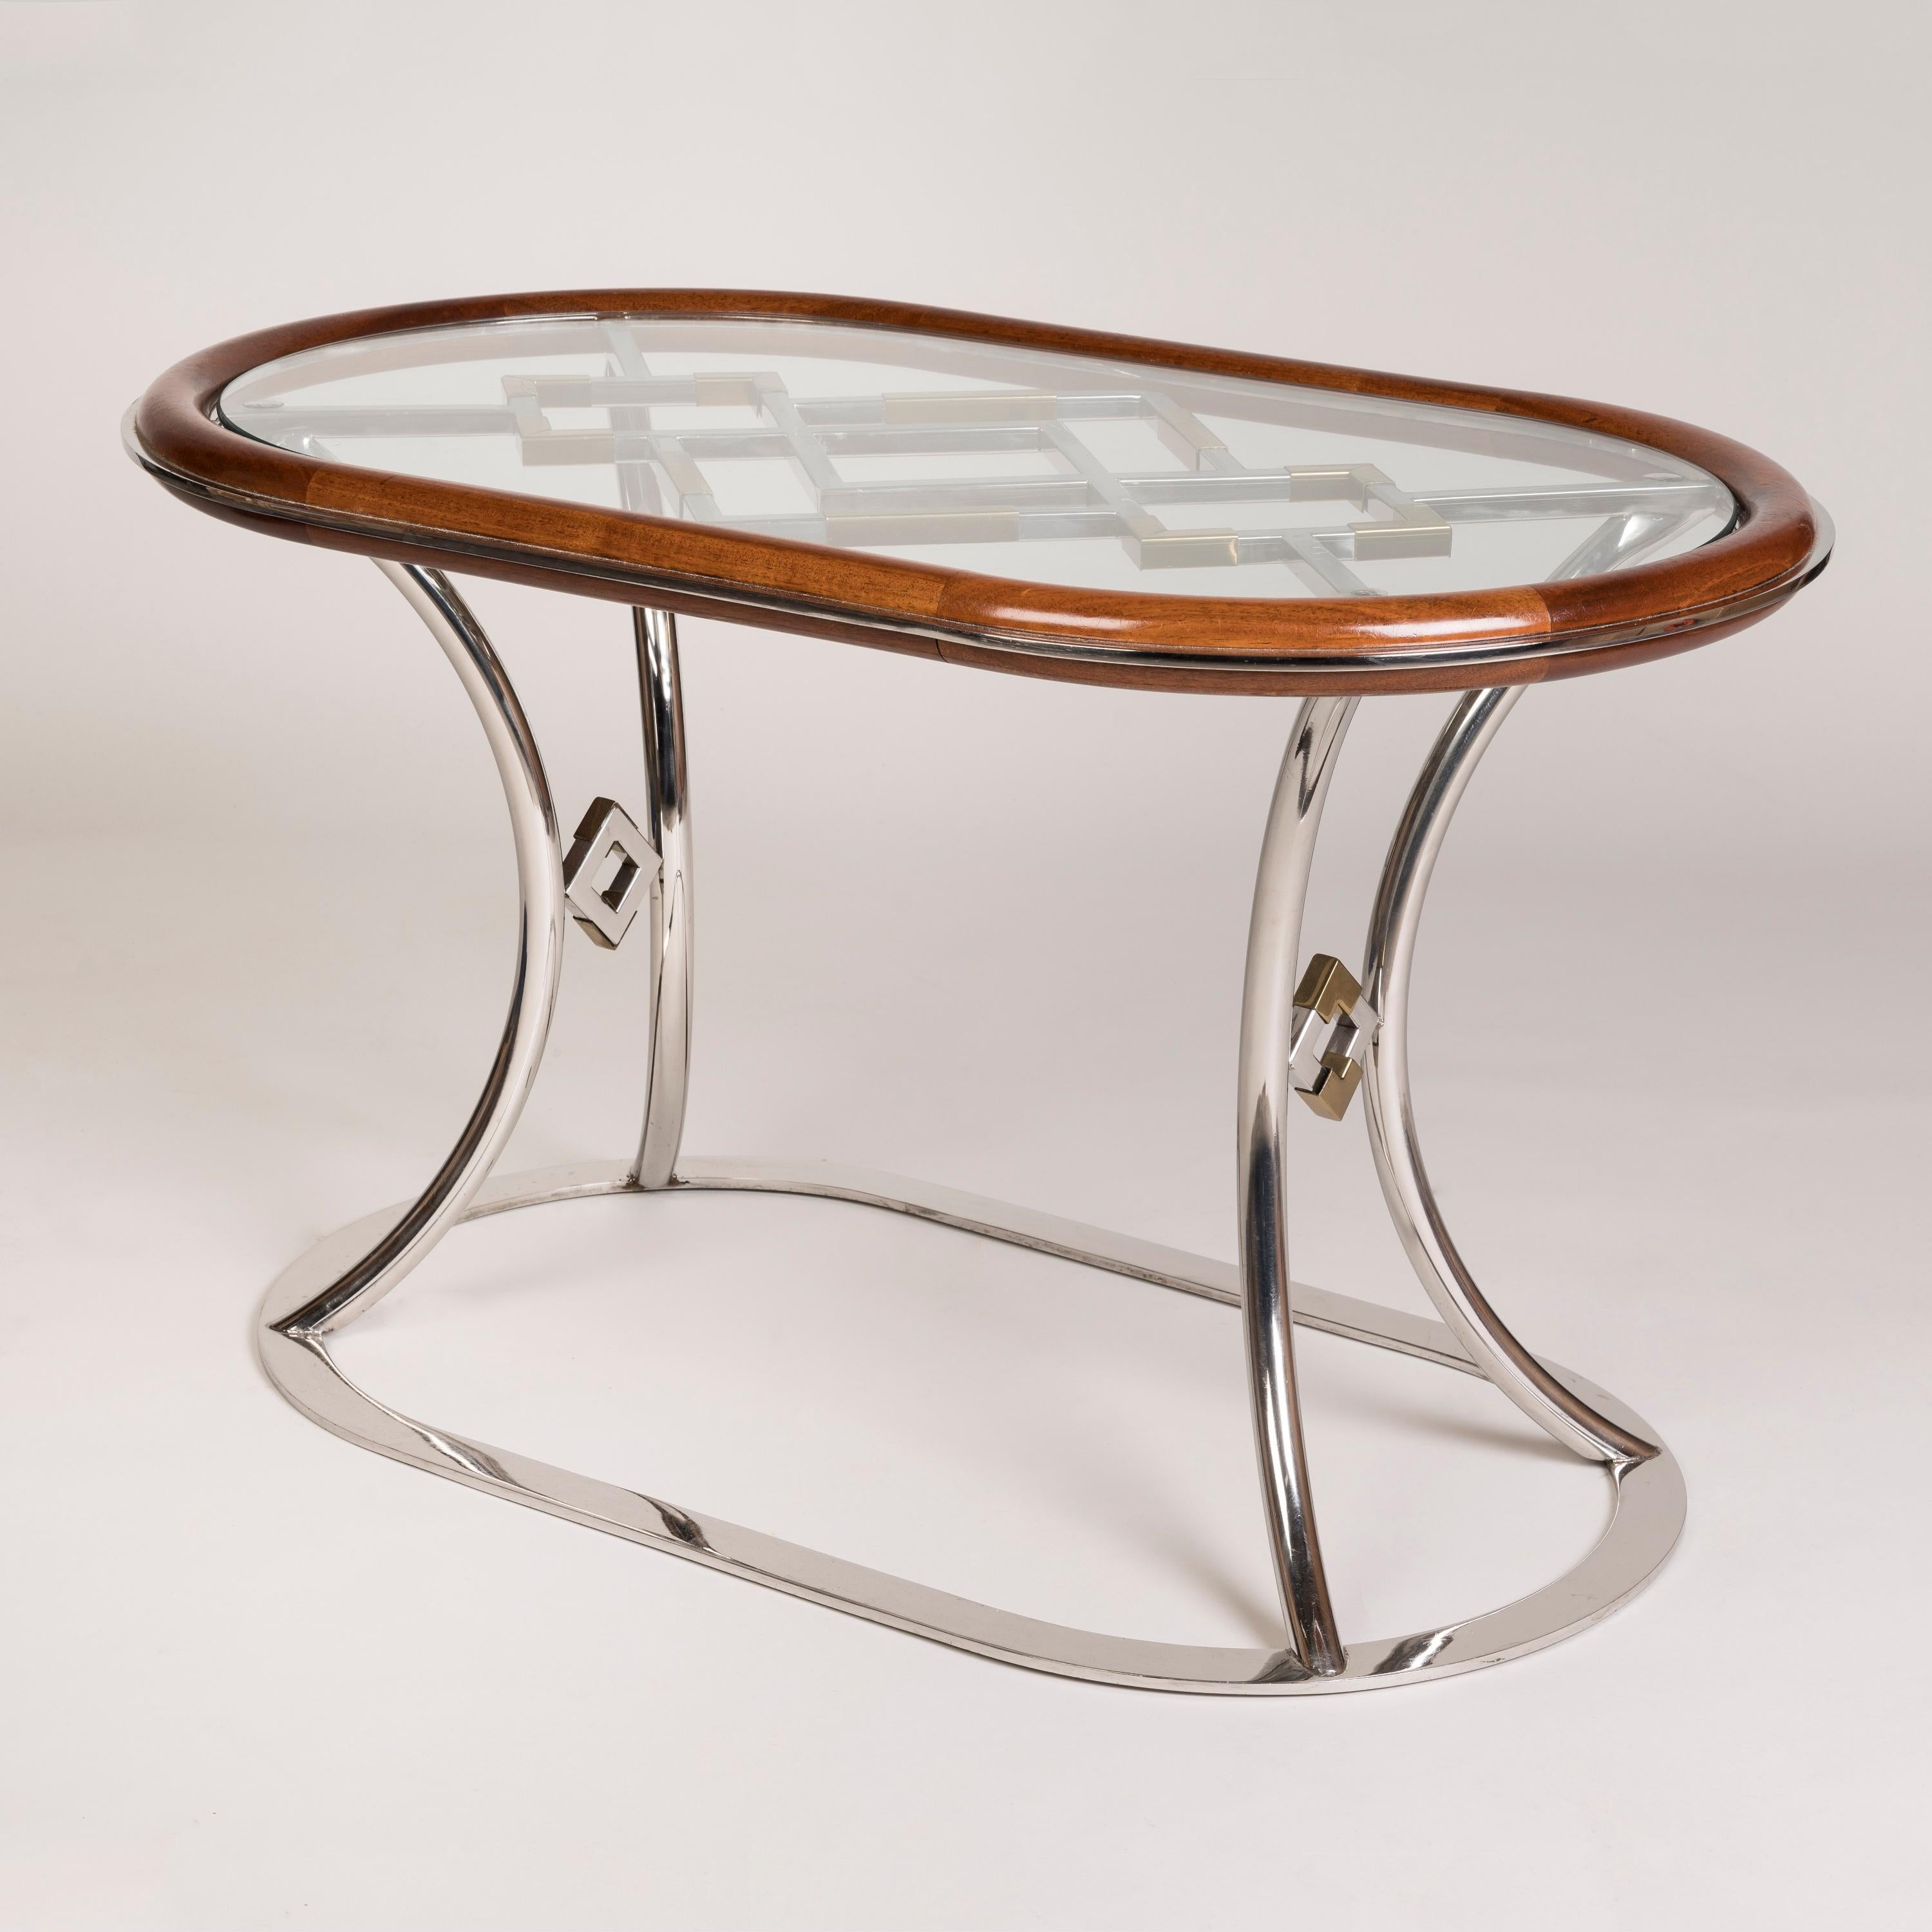 Pair of French Post-War Modernist Oval Coffee Tables attributed to Maison Jansen In Good Condition For Sale In London, GB